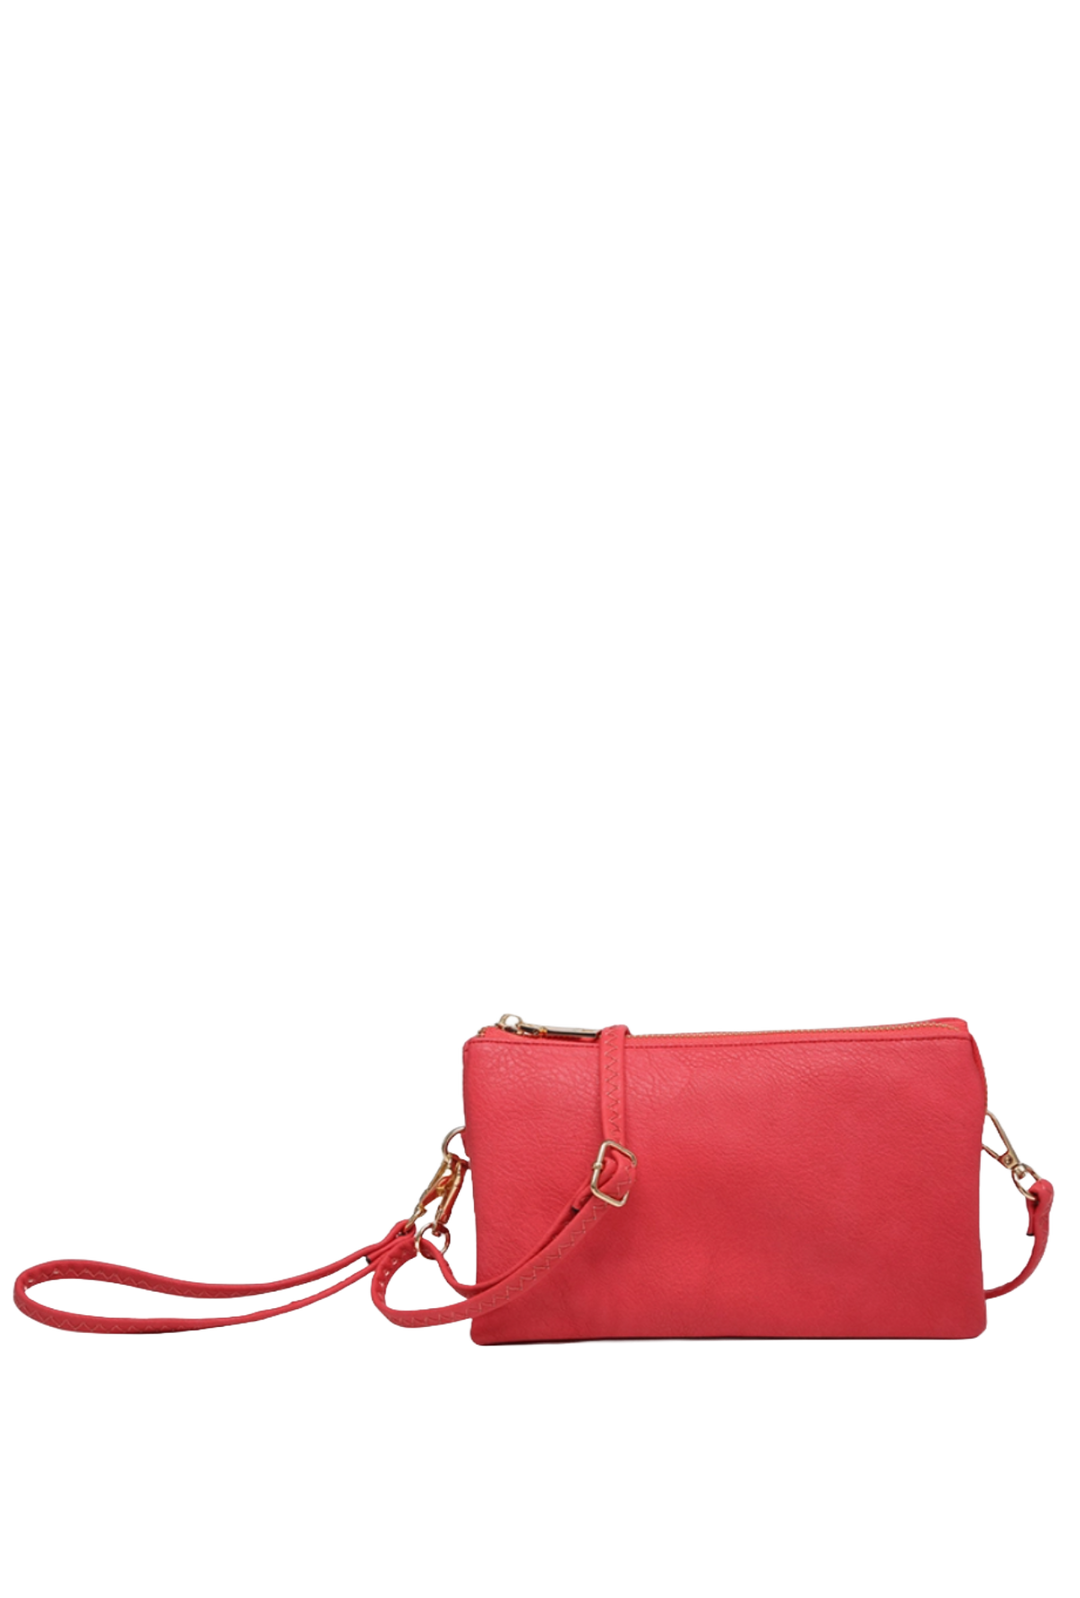 The Tabitha Clutch- Light Red